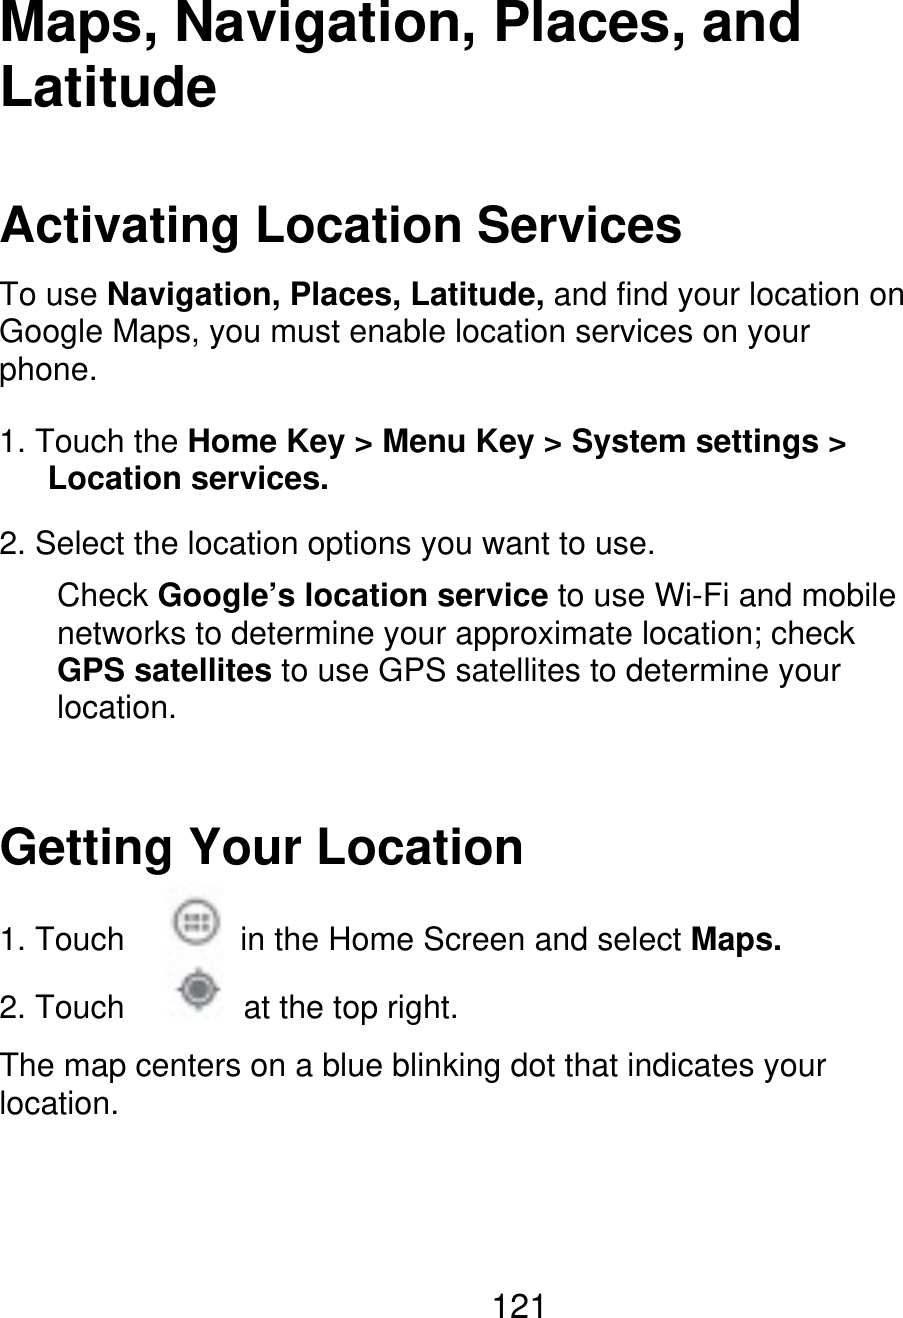 Maps, Navigation, Places, and Latitude Activating Location Services To use Navigation, Places, Latitude, and find your location on Google Maps, you must enable location services on your phone. 1. Touch the Home Key &gt; Menu Key &gt; System settings &gt;    Location services. 2. Select the location options you want to use. Check Google’s location service to use Wi-Fi and mobile networks to determine your approximate location; check GPS satellites to use GPS satellites to determine your location. Getting Your Location 1. Touch 2. Touch in the Home Screen and select Maps. at the top right. The map centers on a blue blinking dot that indicates your location. 121 